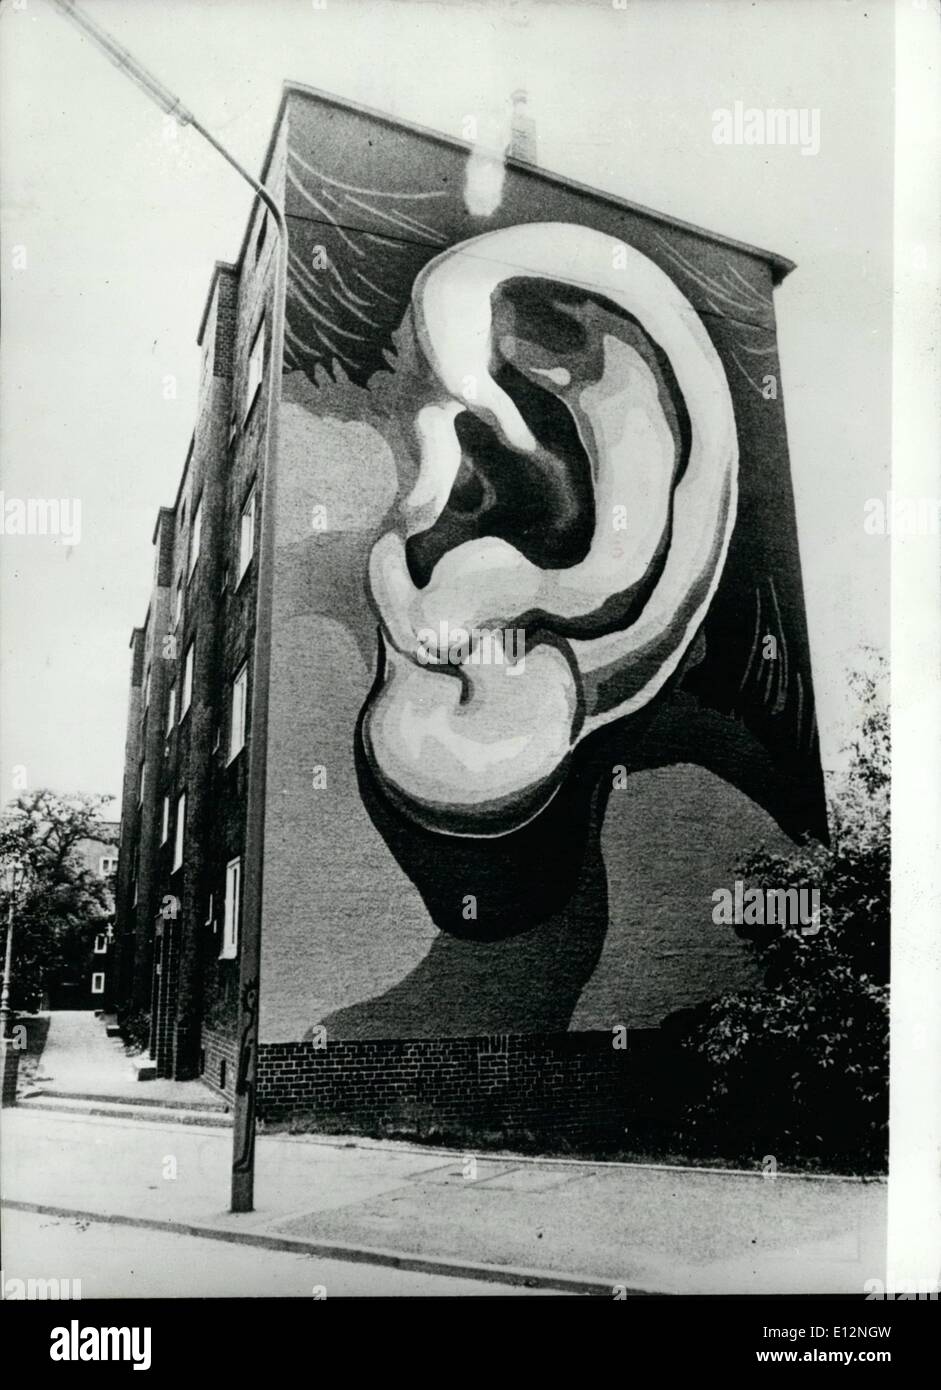 Feb. 24, 2012 - Walls have ears. And just to prove the old saying this wall on a house in Duesseldorf West Germany has a giant ear painted by some students of arts. Stock Photo